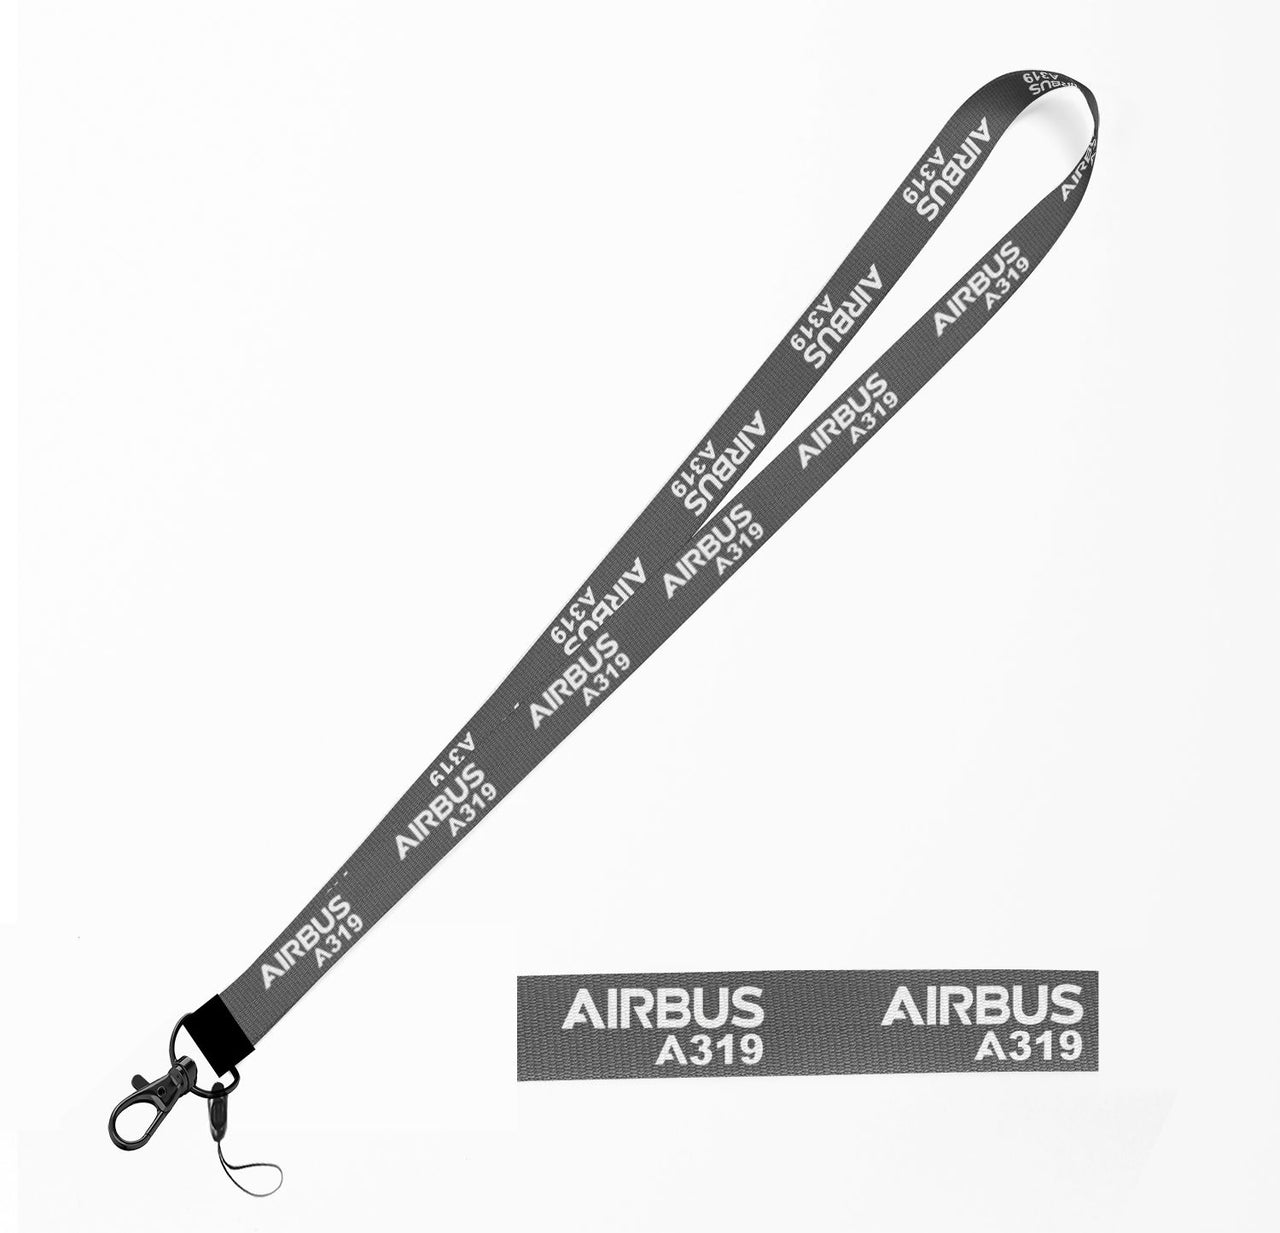 Airbus A319 & Text Designed Lanyard & ID Holders